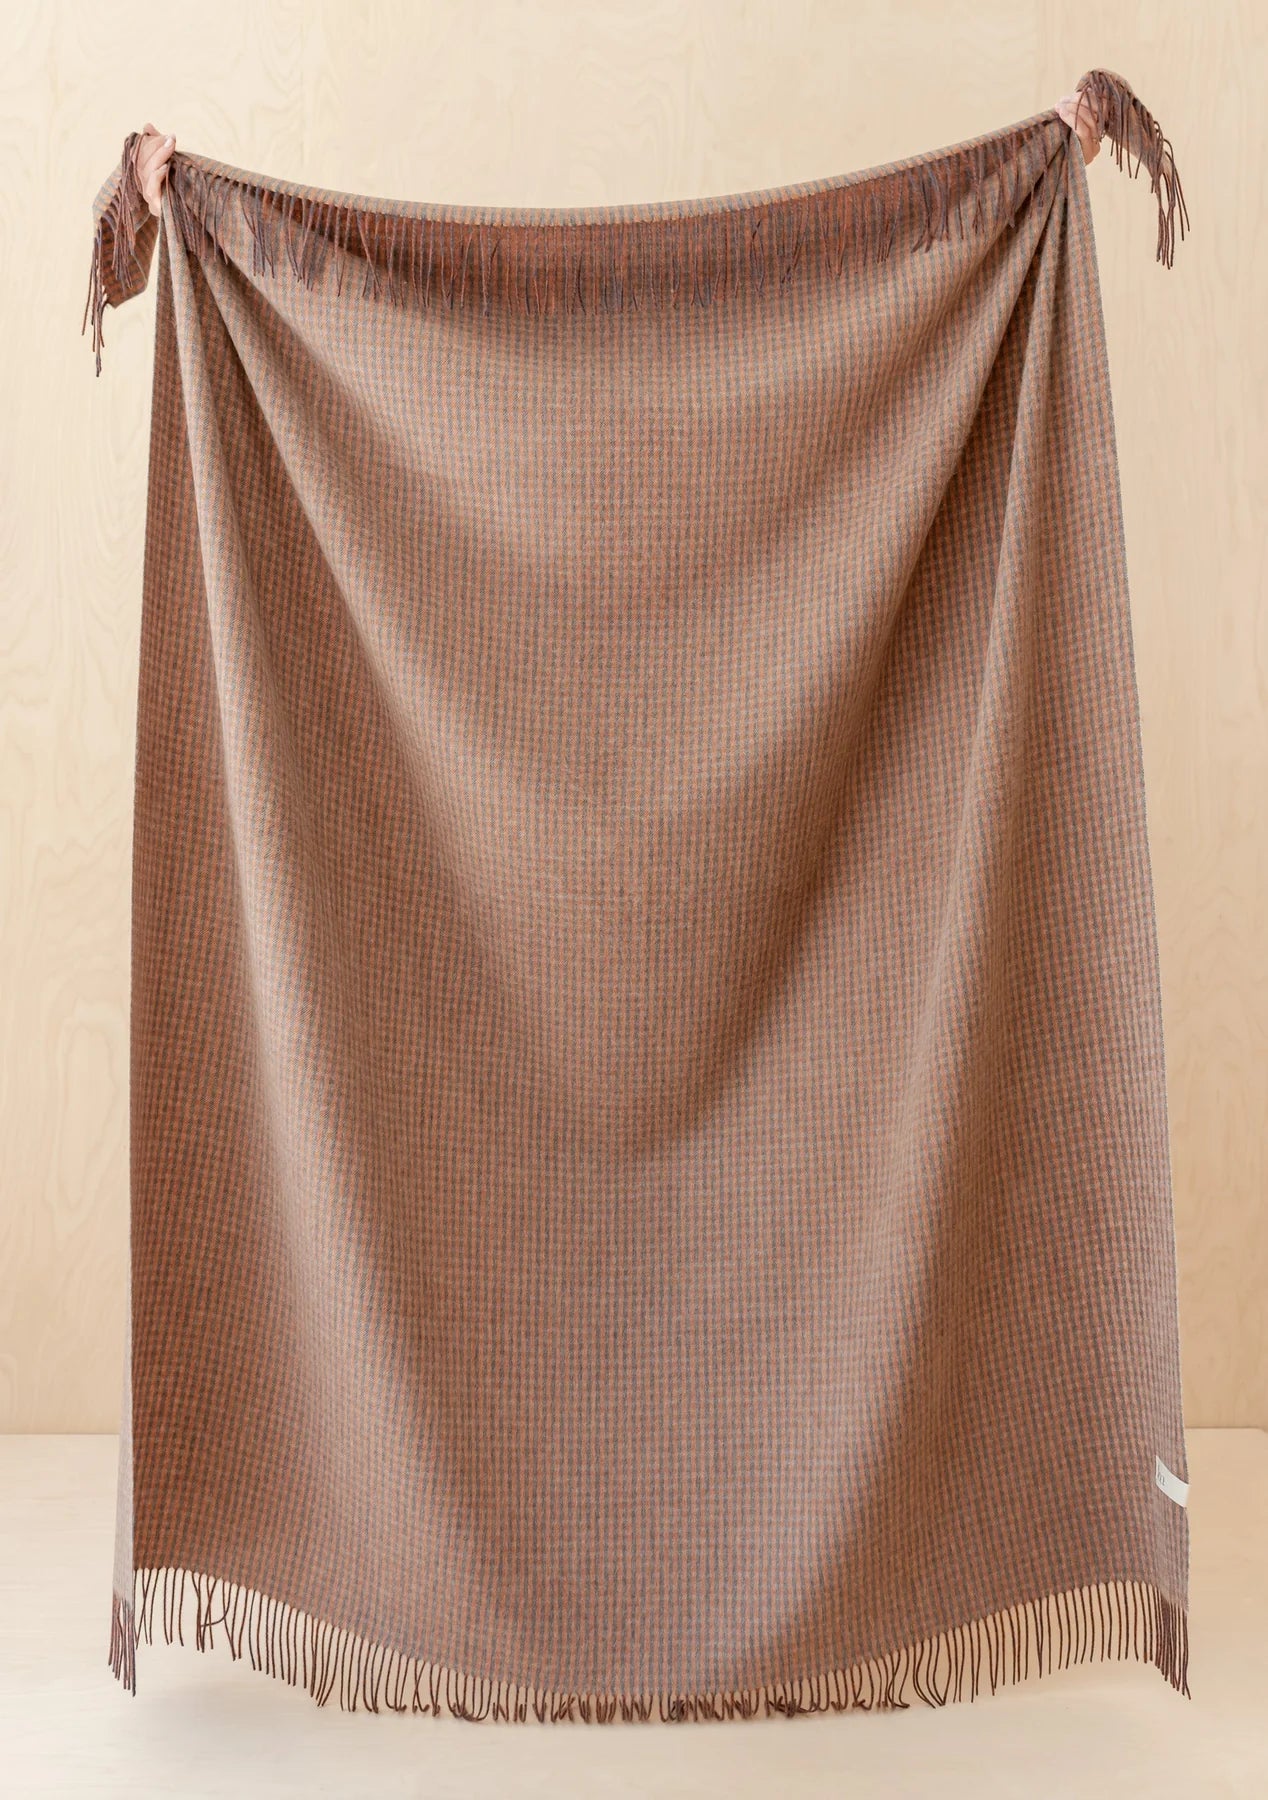 Lambswool Blanket in Coffee Twill Check